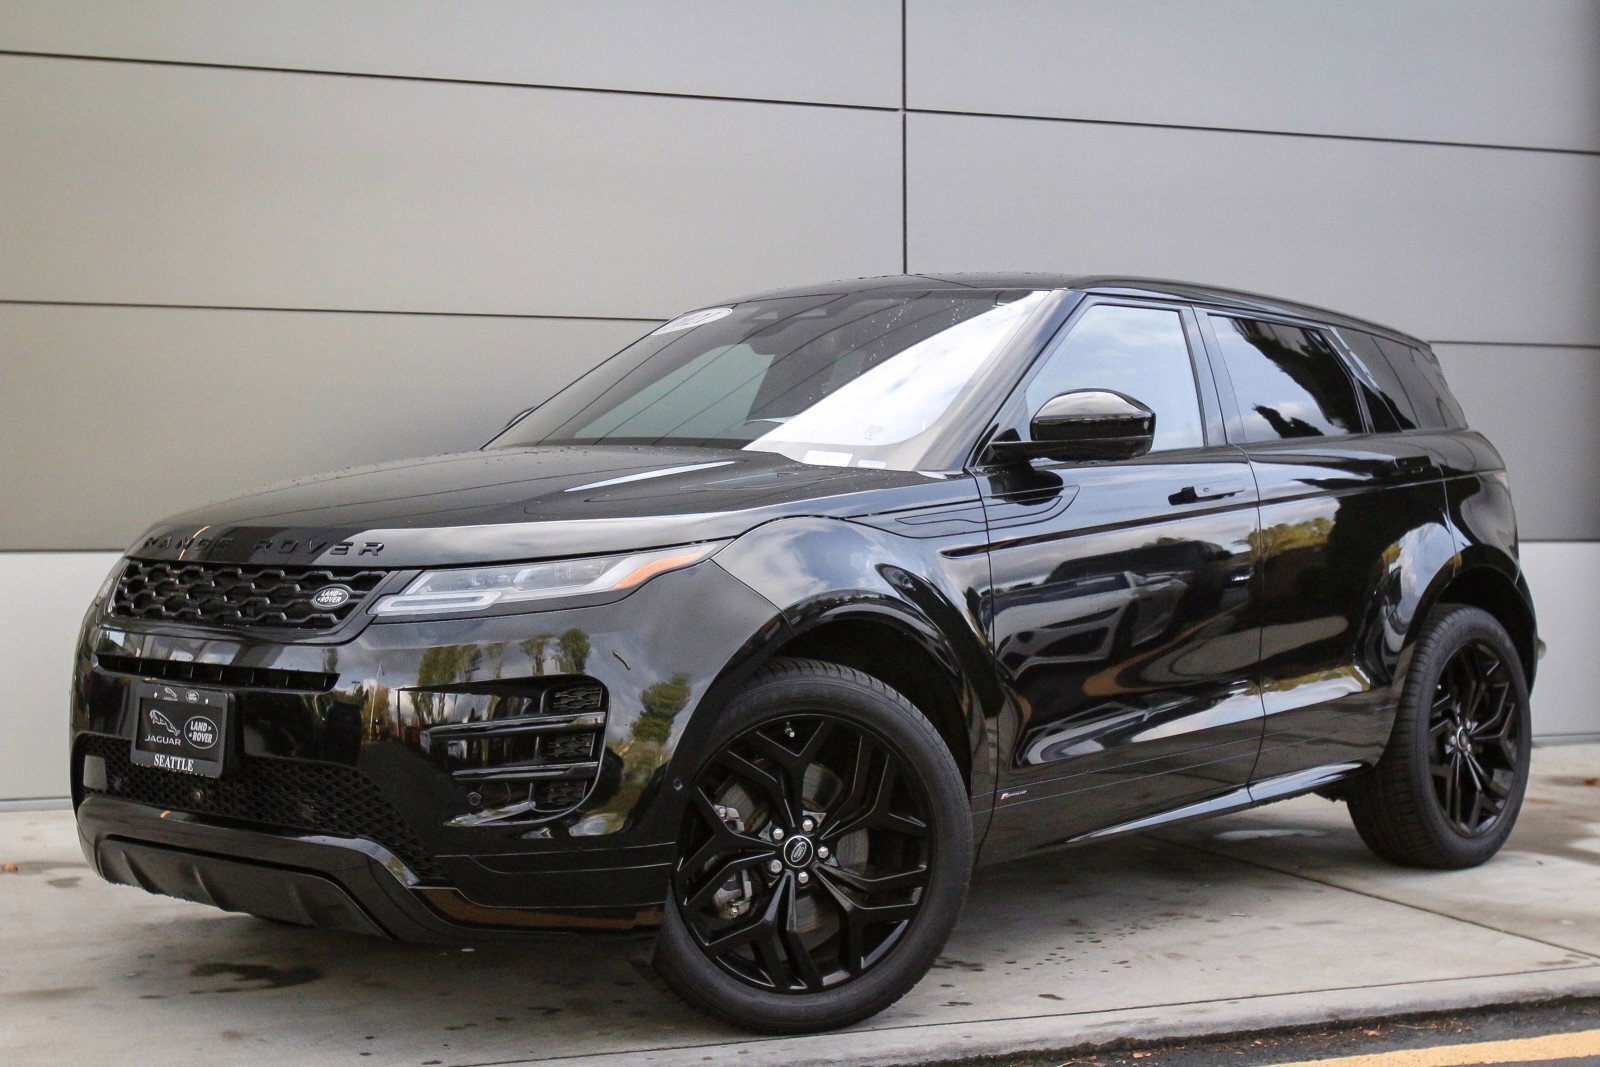 Pre-Owned 2021 Land Rover Range Evoque R-Dynamic HSE near Madison Park, WA  - Land Rover Seattle